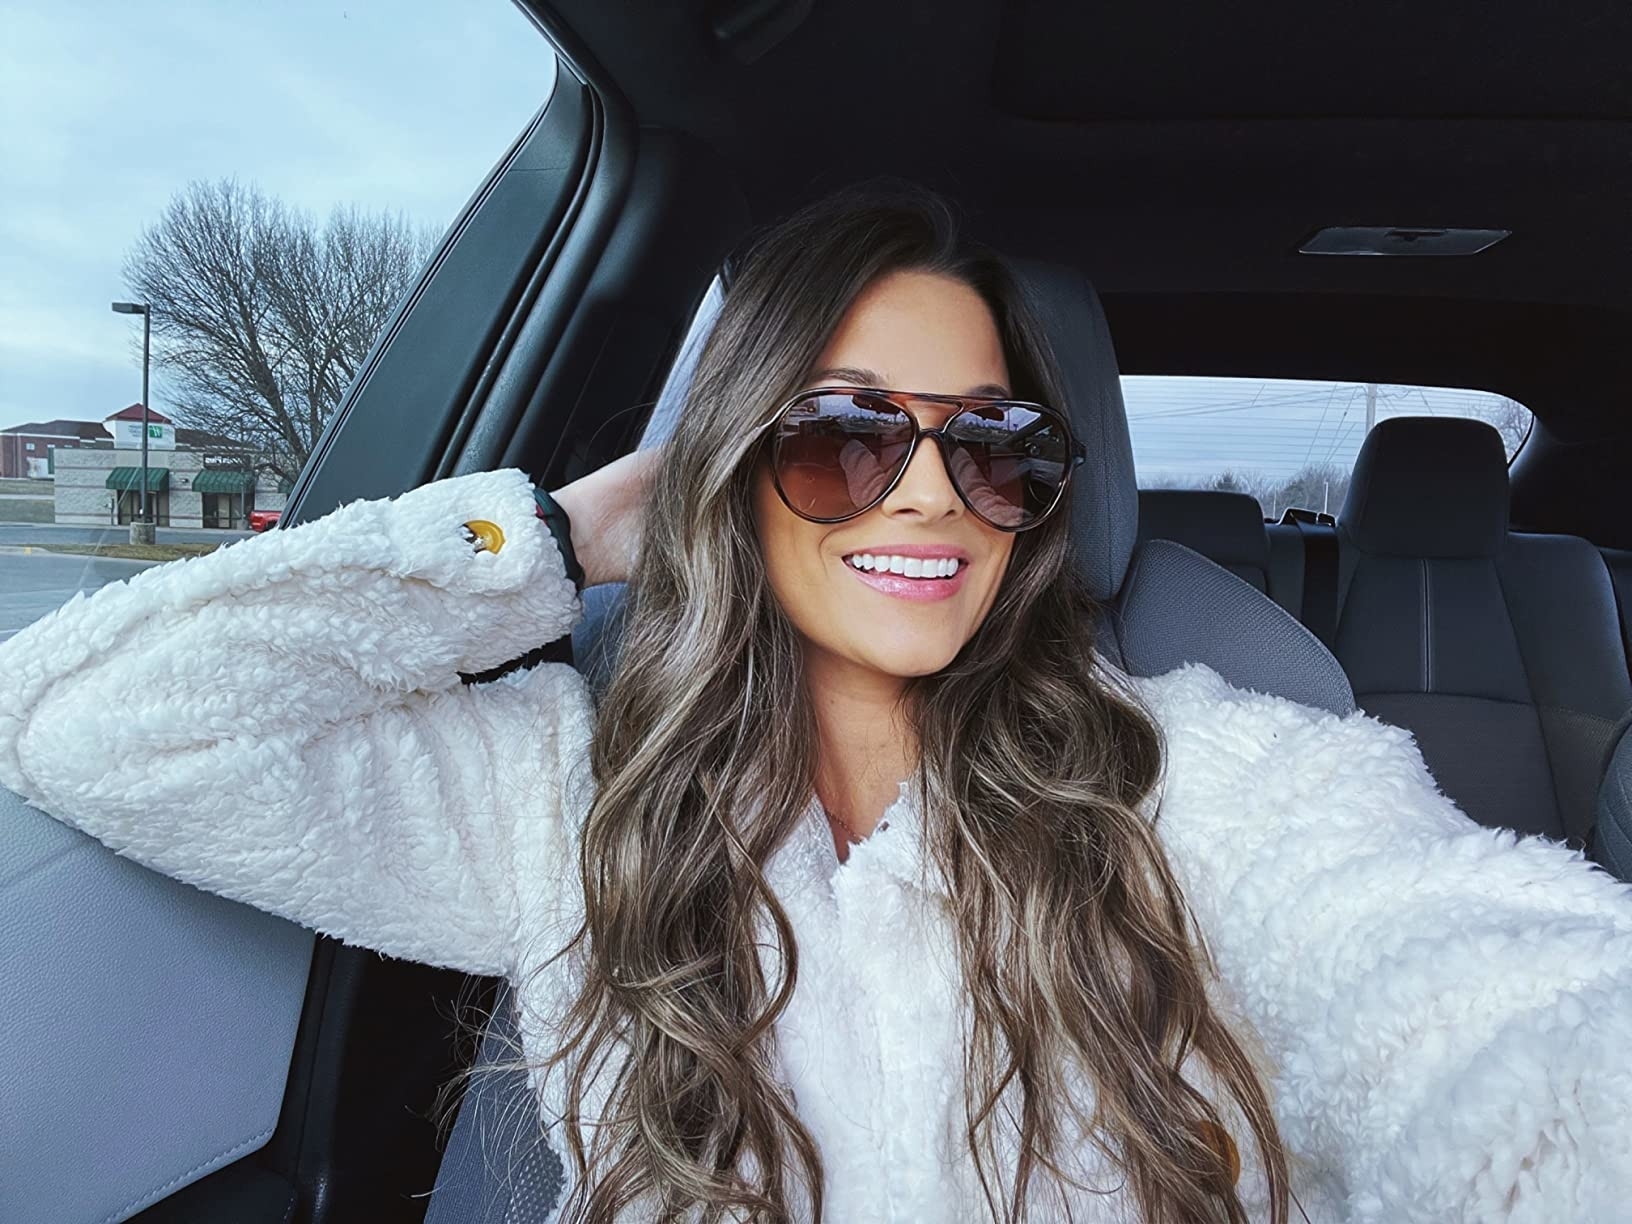 Woman in car wearing sunglasses and a white fluffy jacket smiling at the camera